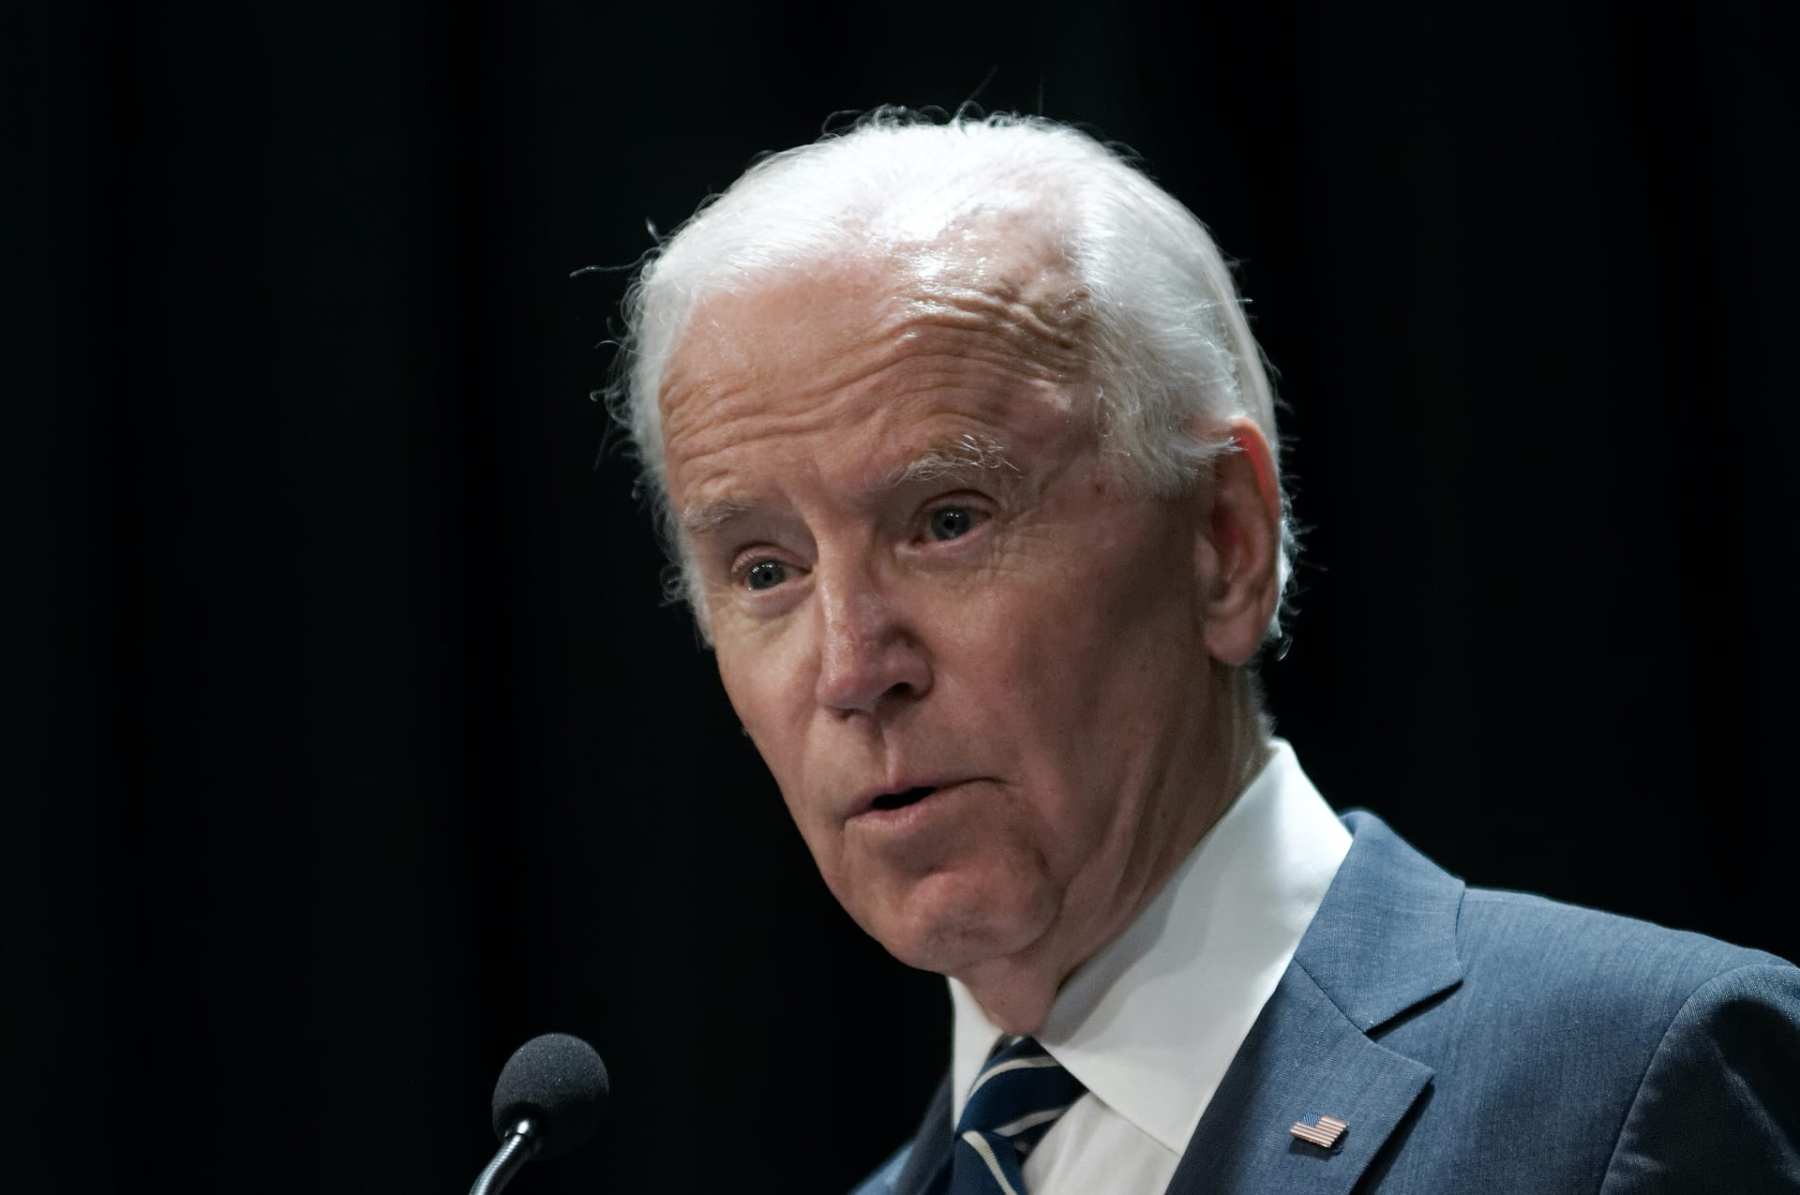 A close up photo of Joe Biden speaking into a microphone.